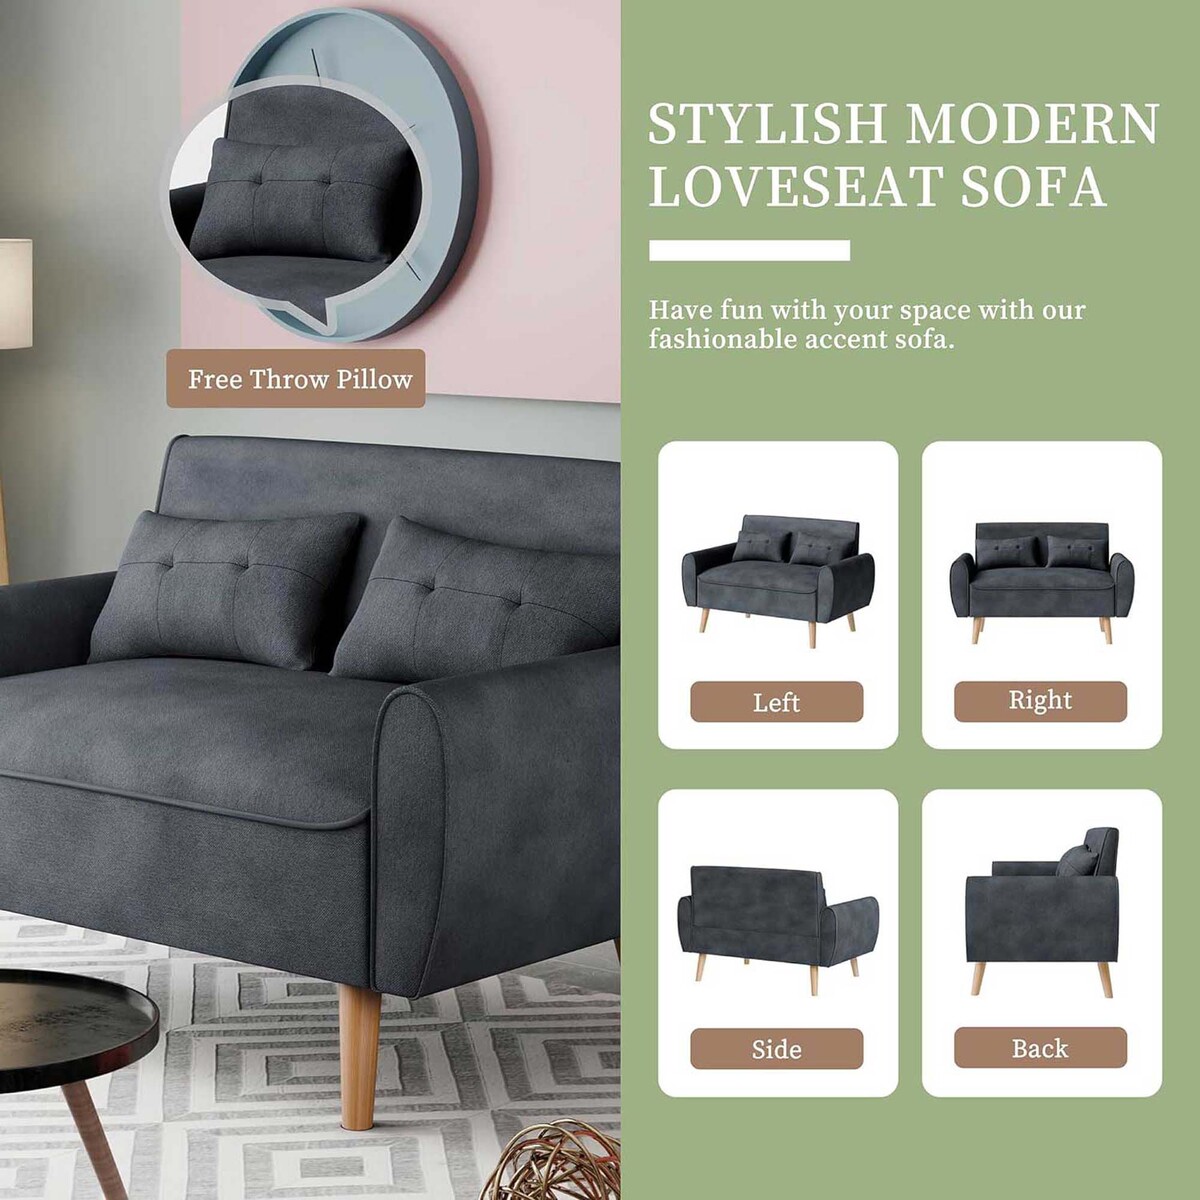 Chic Noir, Light Grey  2-Seater Sapce Saving Tufted Love Seat with Back Cushions and Tapered Wood Legs for Living Room